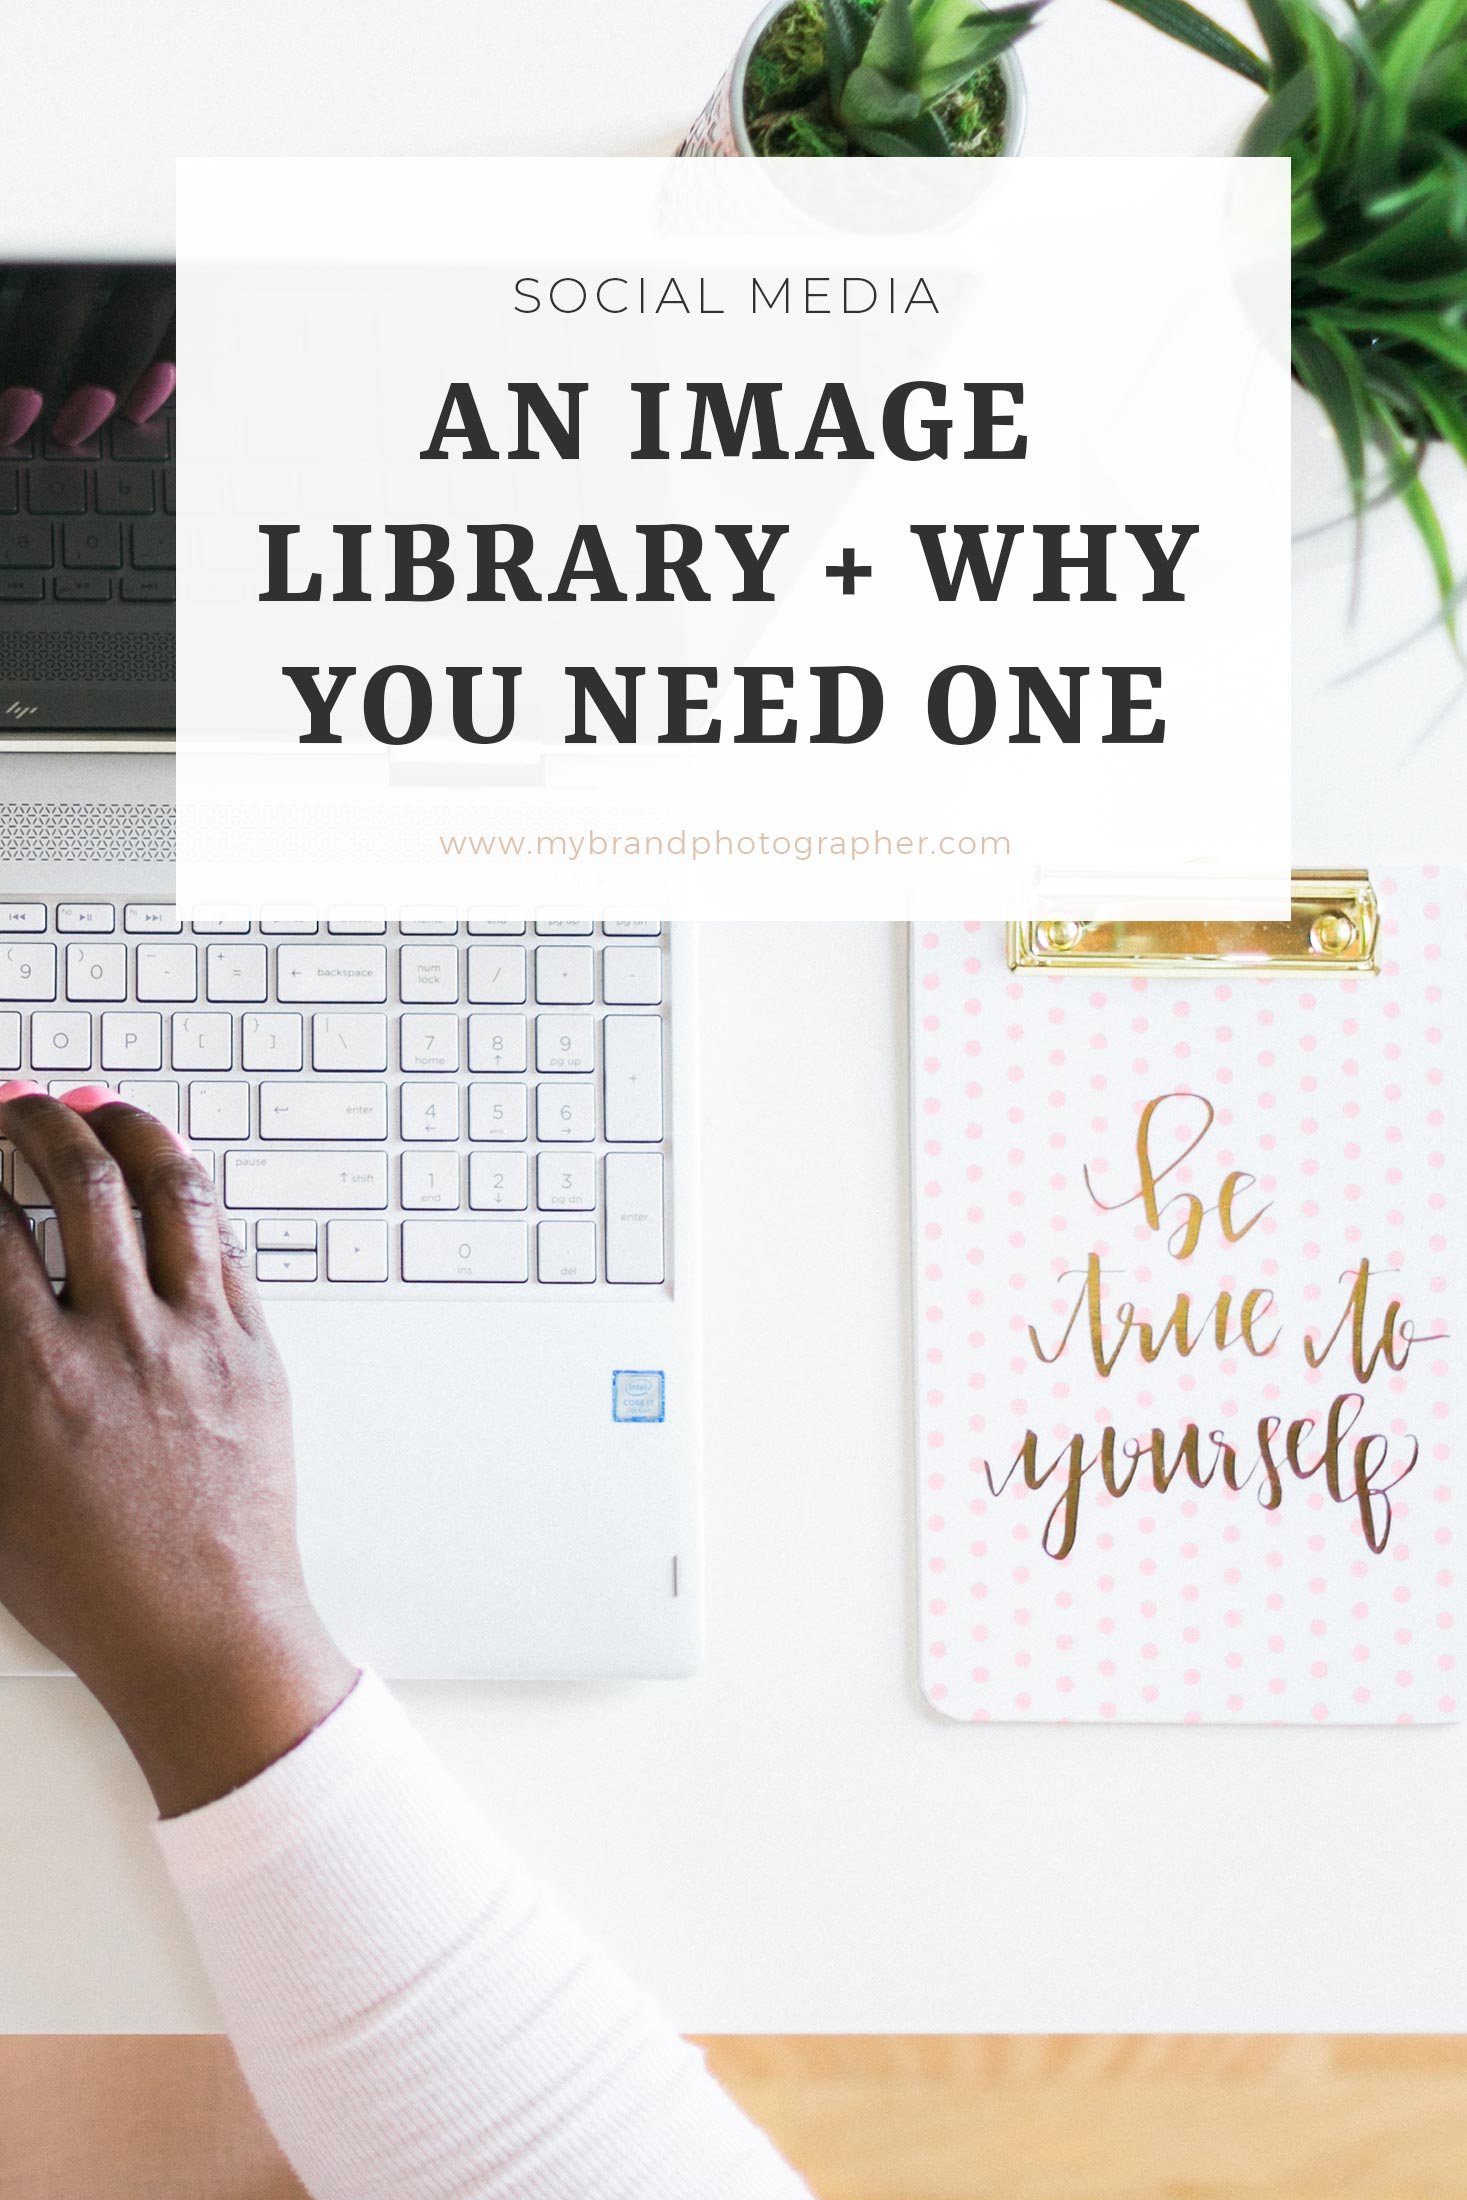 image library and why you need one, brand photography for creatives, coaches, fempreneurs, and entrepreneurs in Milwaukee, Wisconsin. #creativepreneur #womeninbusiness #brandphotographer #brandphotography